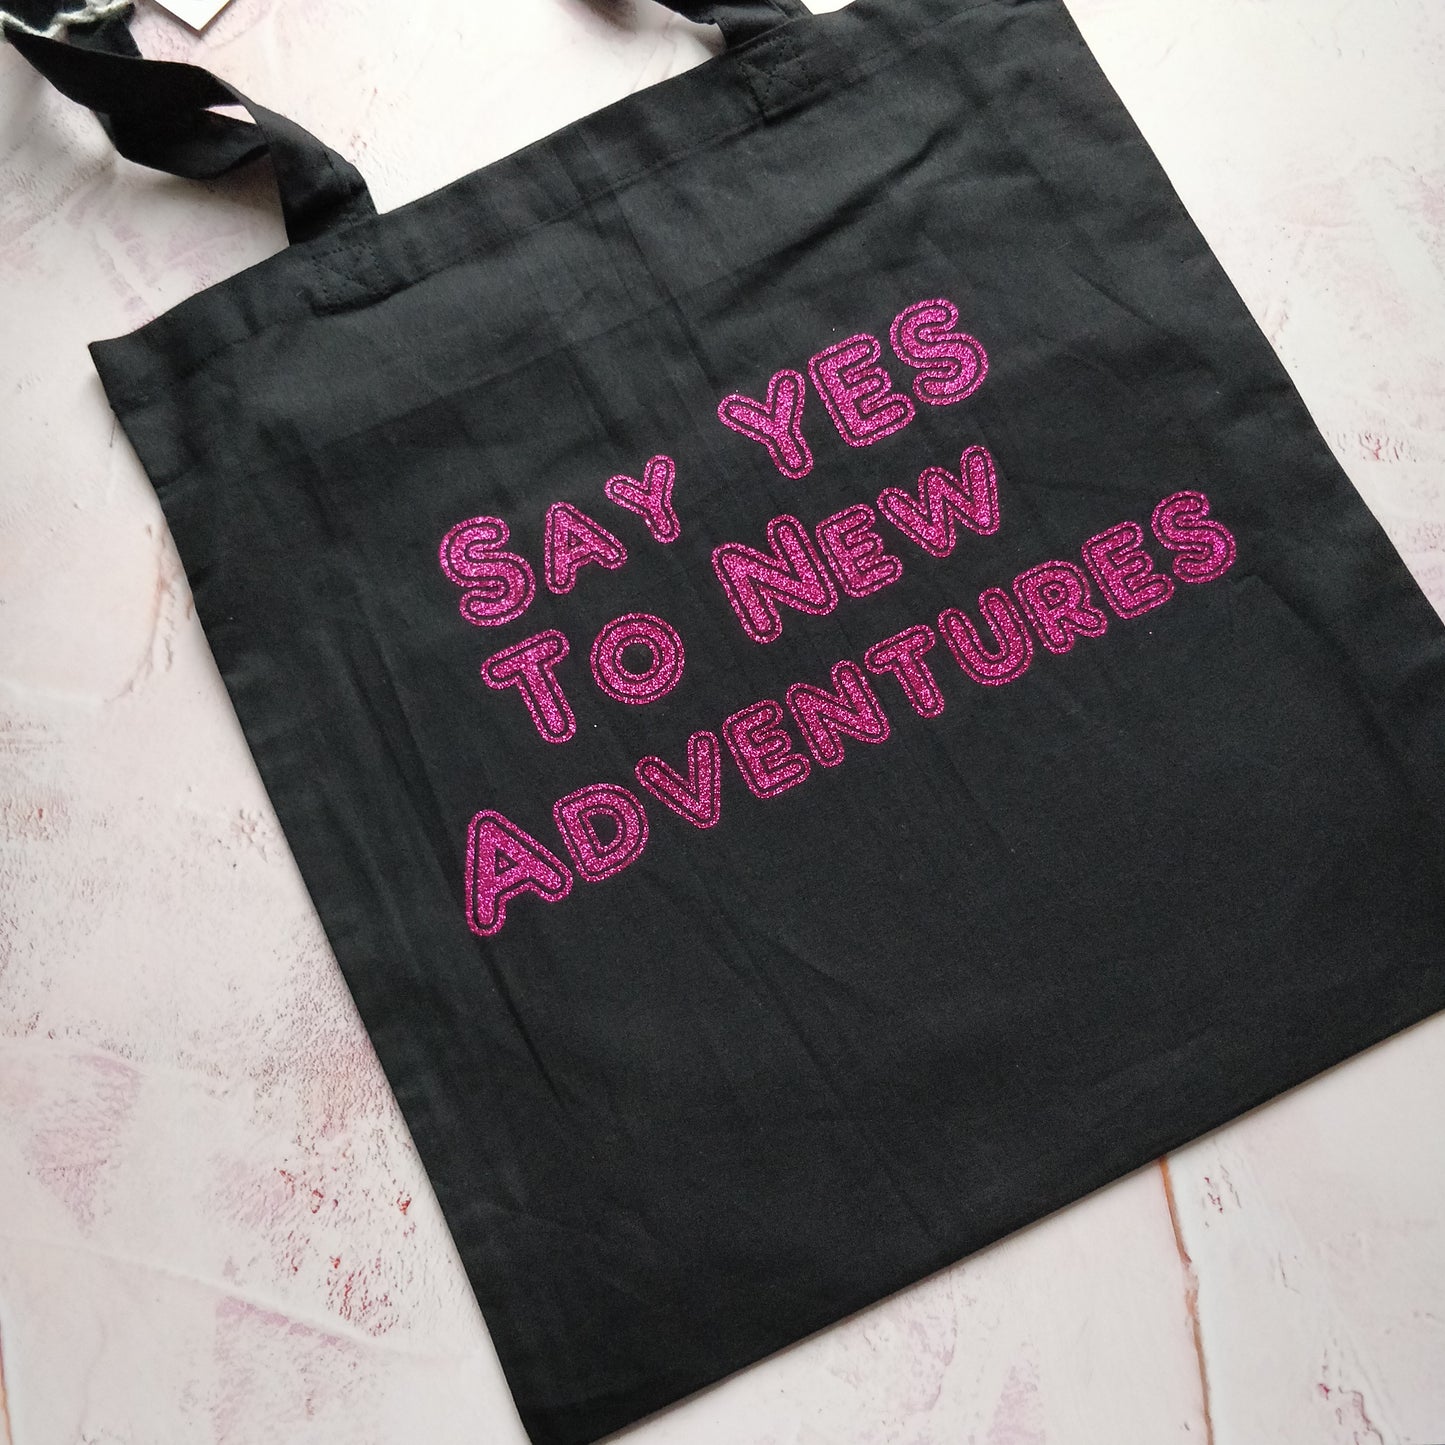 Say Yes to new Adventures Tote Bag - Fay Dixon Design